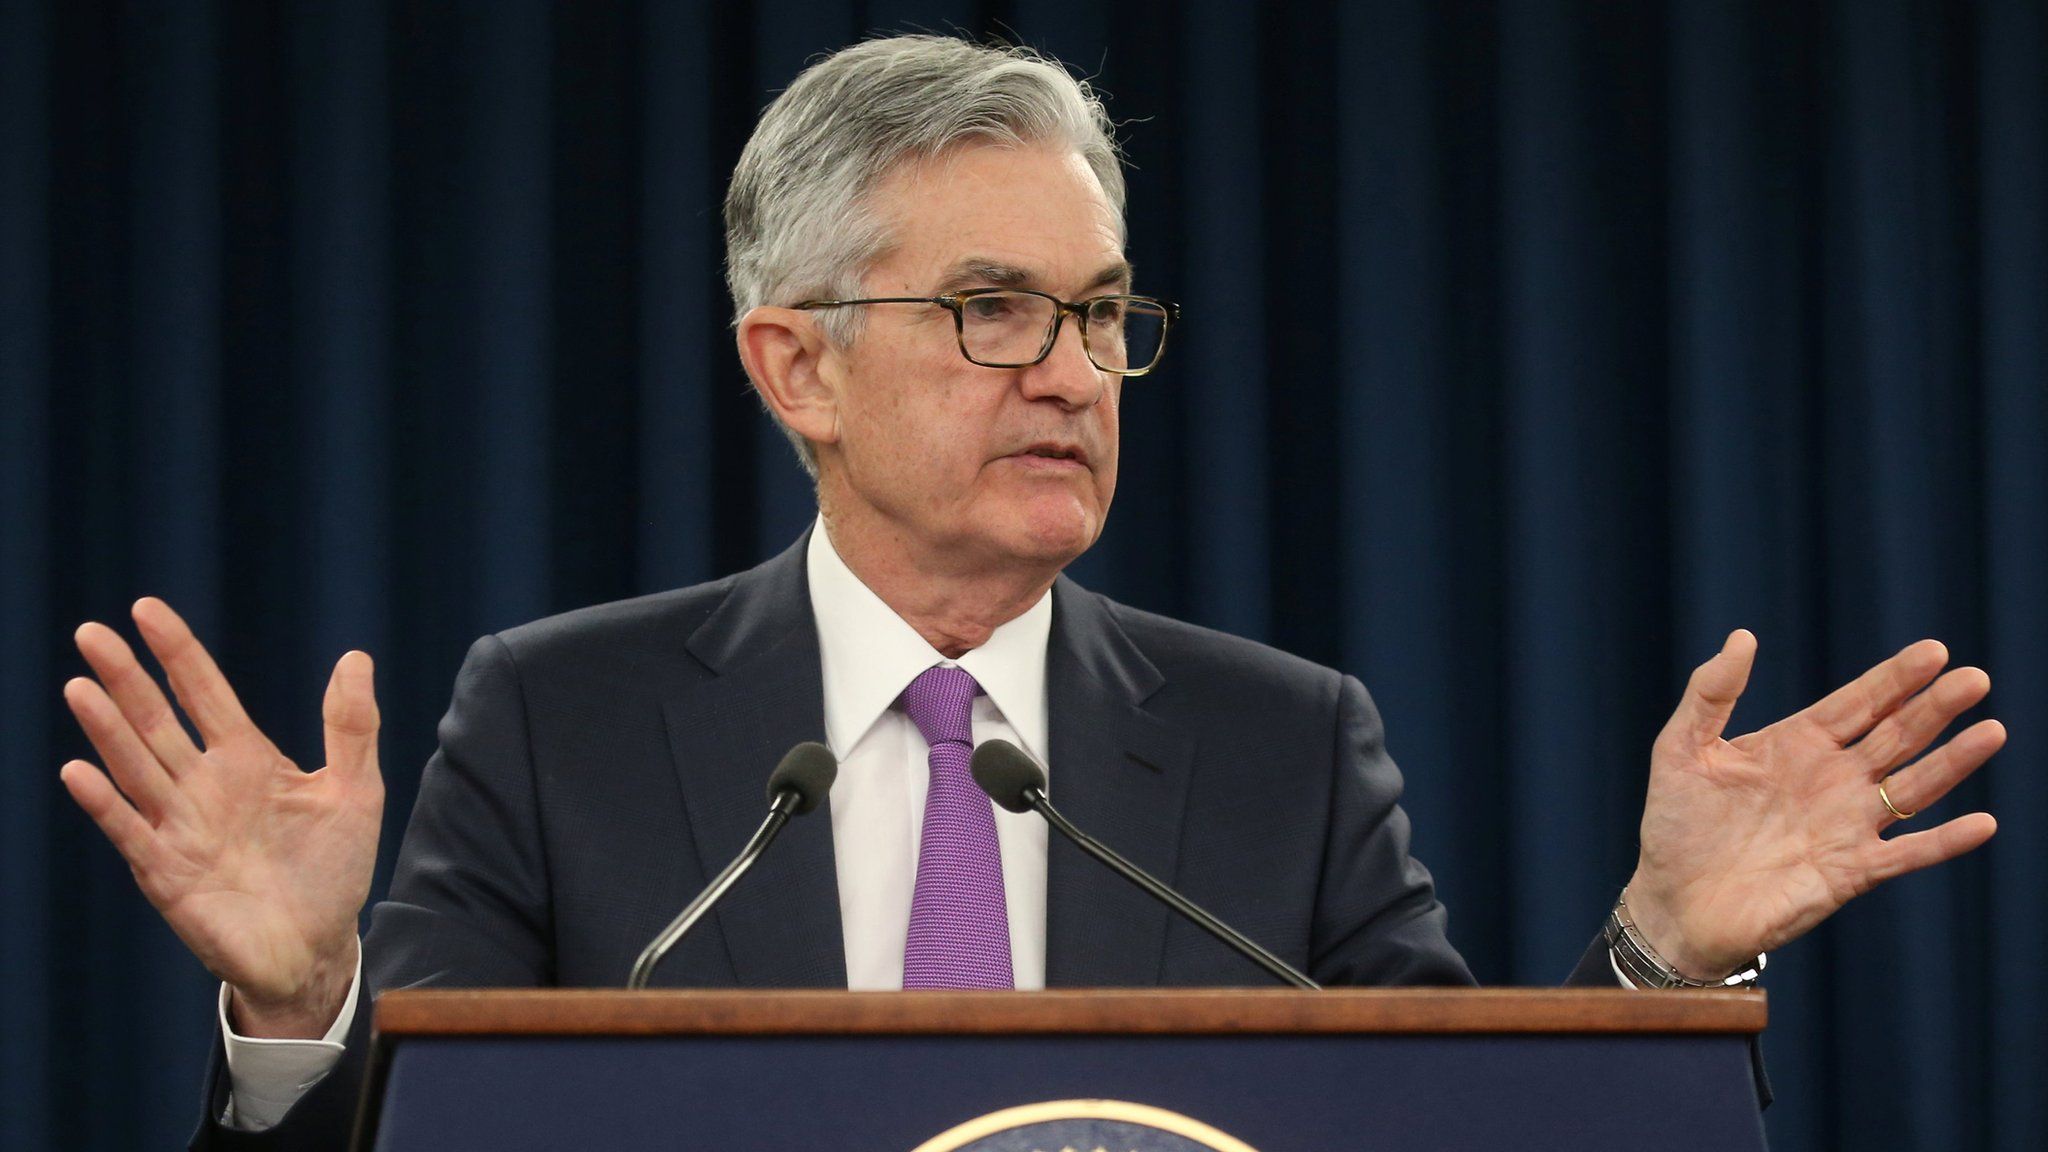 Federal Reserve Chairman Jerome Powell holds a press conference following a two day Federal Open Market Committee policy meeting in Washington, U.S., January 30, 2019.